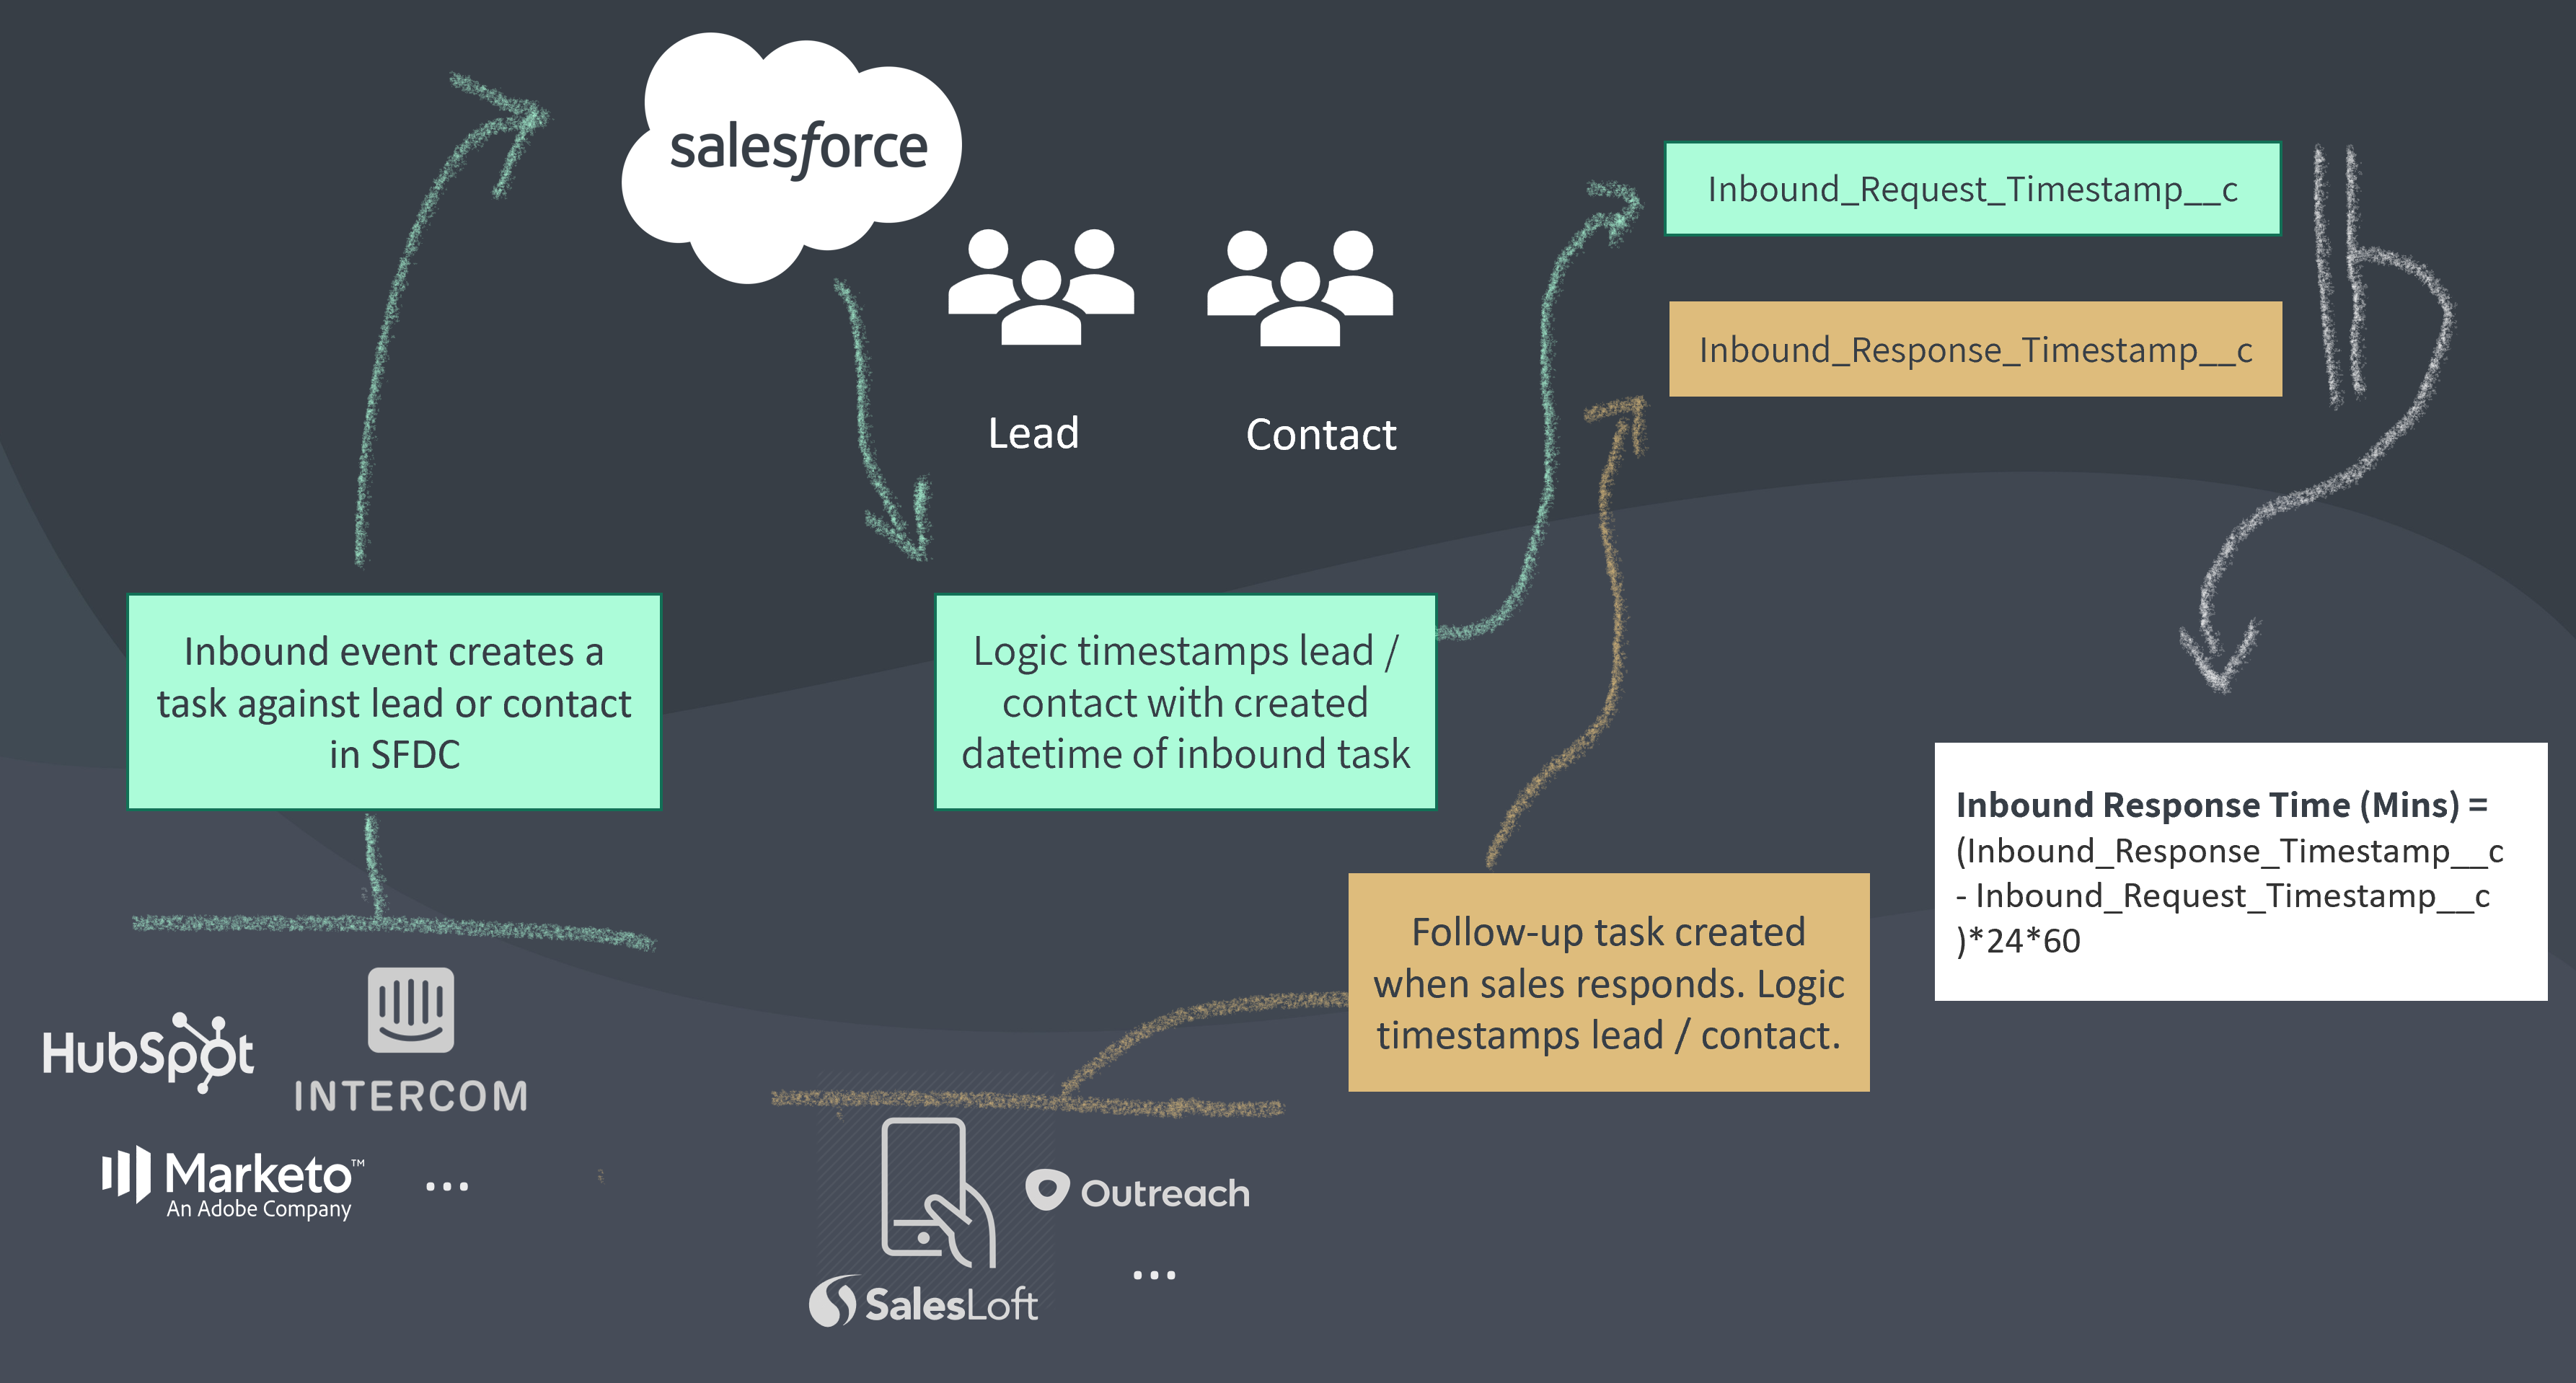 Using Salesforce.com APEX, Process Builder, or Flows to configure inbound lead response time